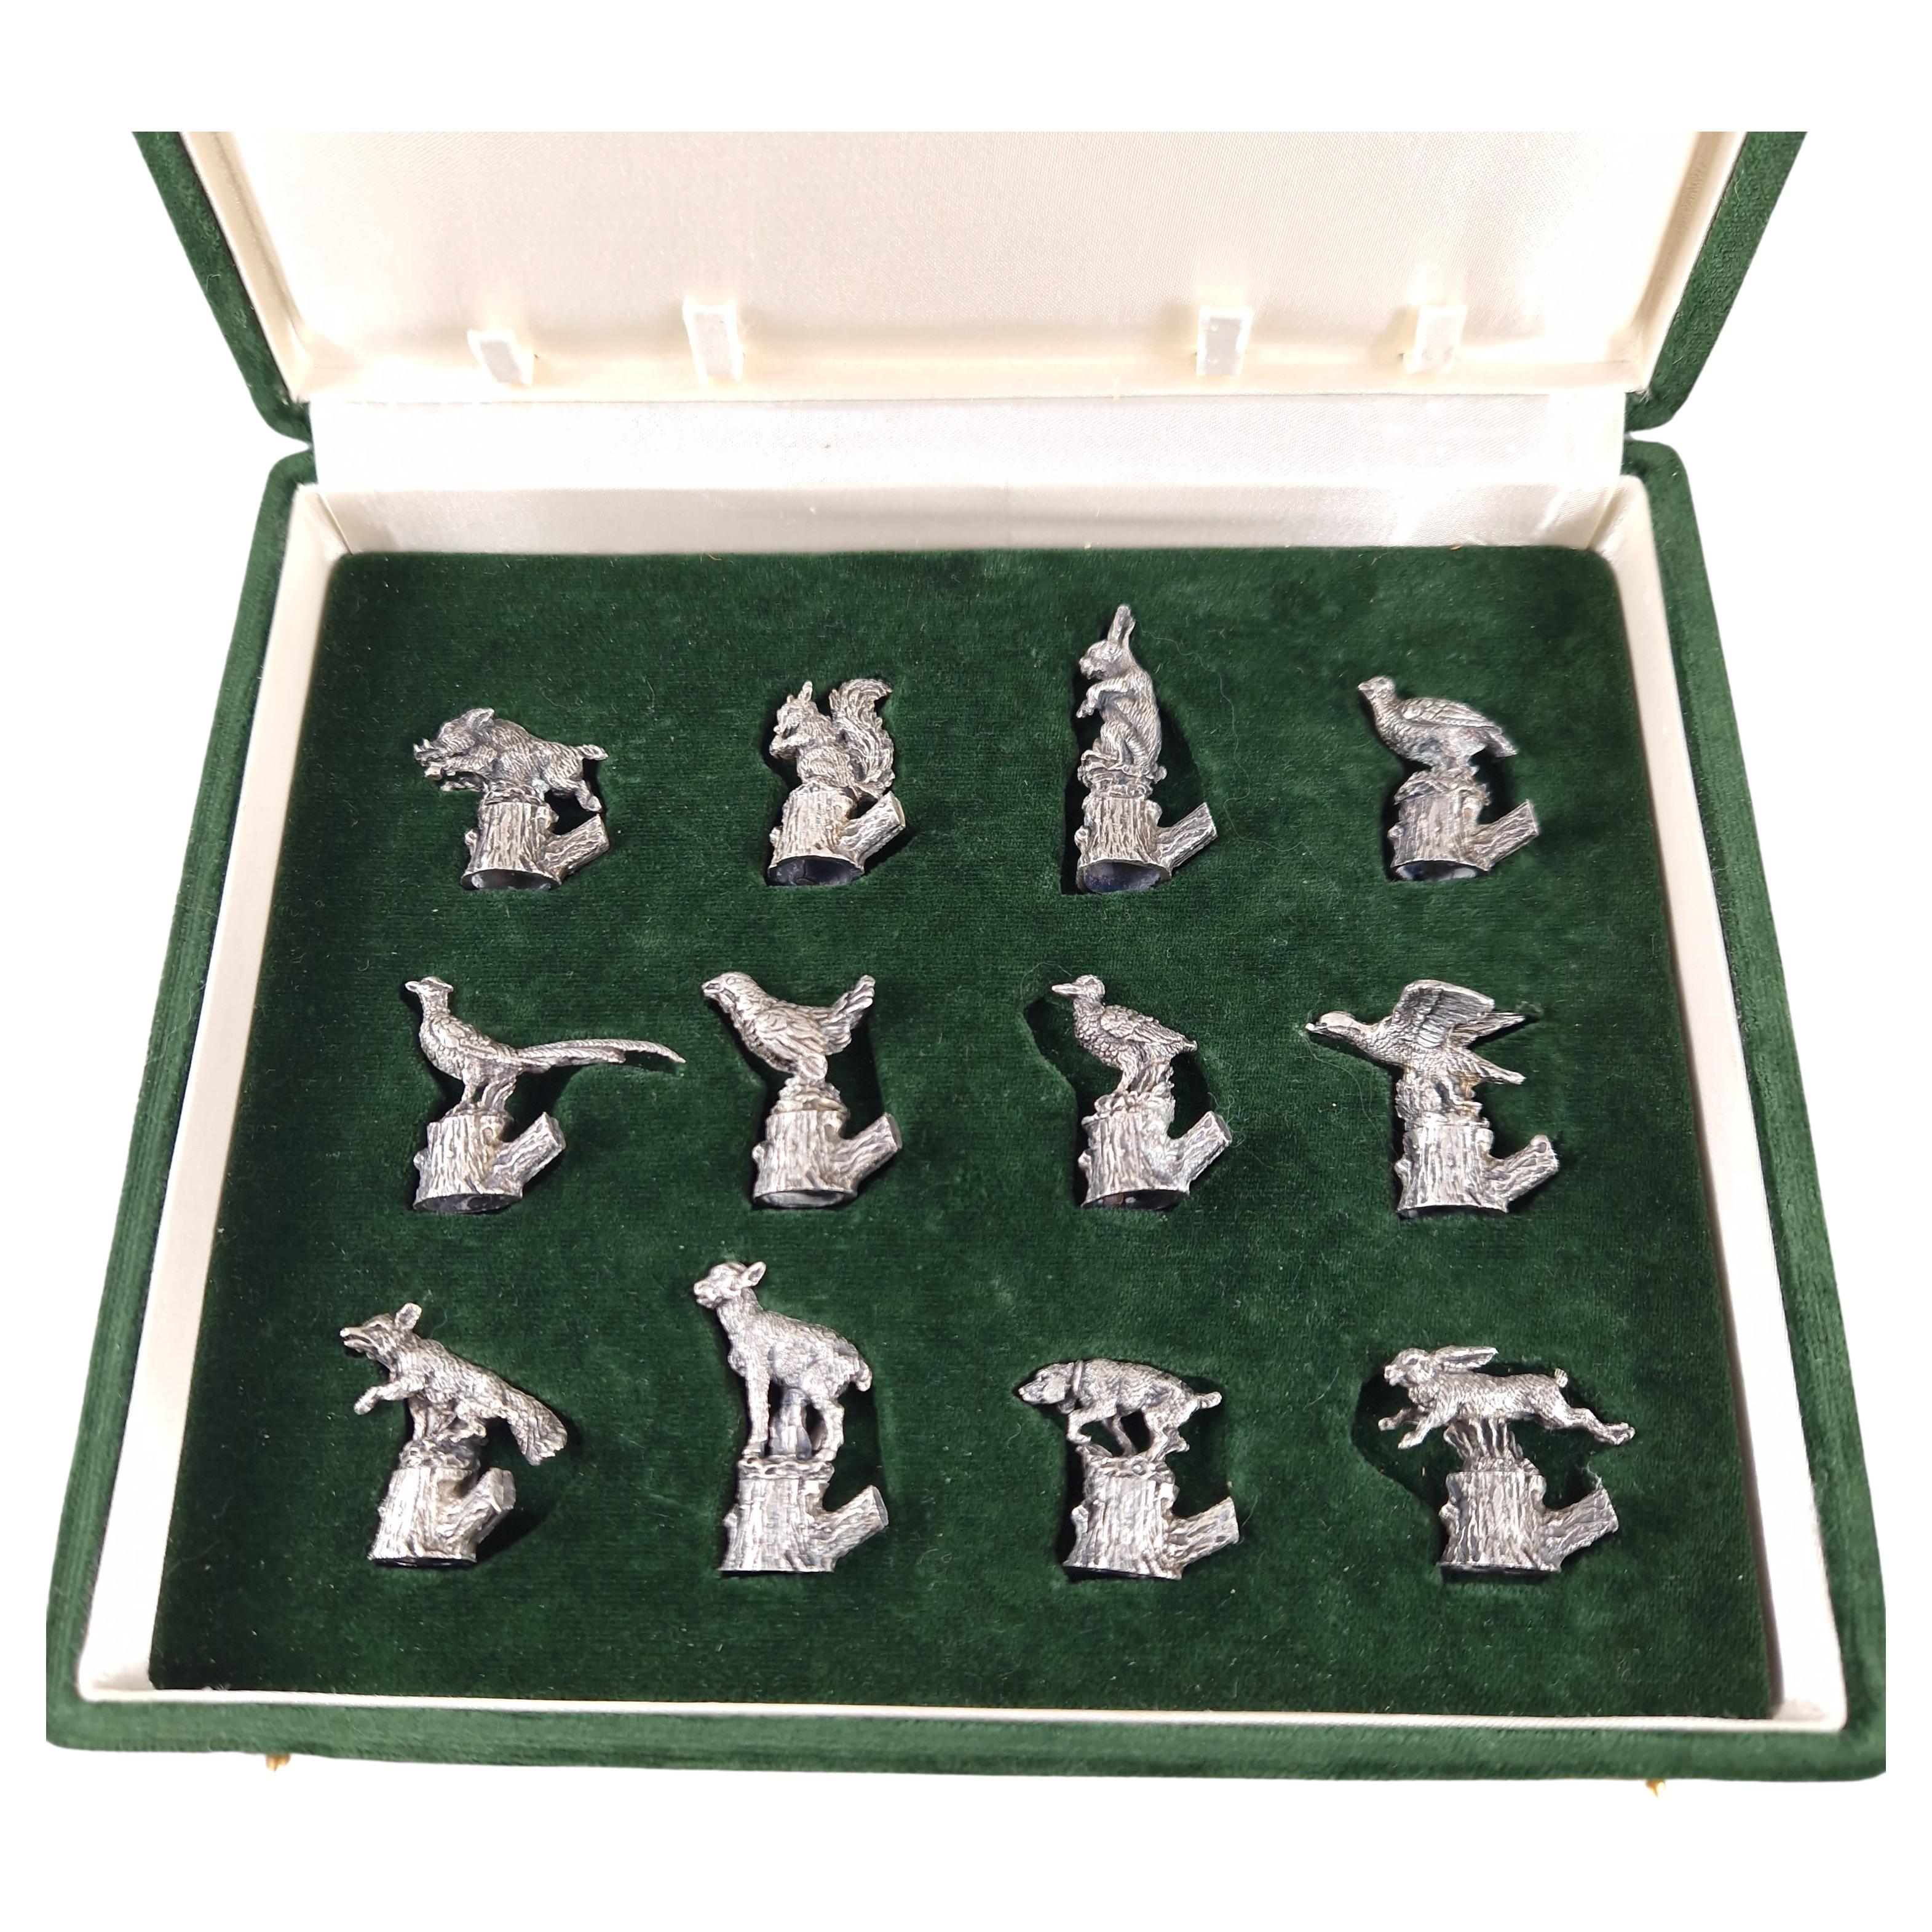 12 Animal Place Card Or Menu Holders In Sterling Silver With Hunting Theme